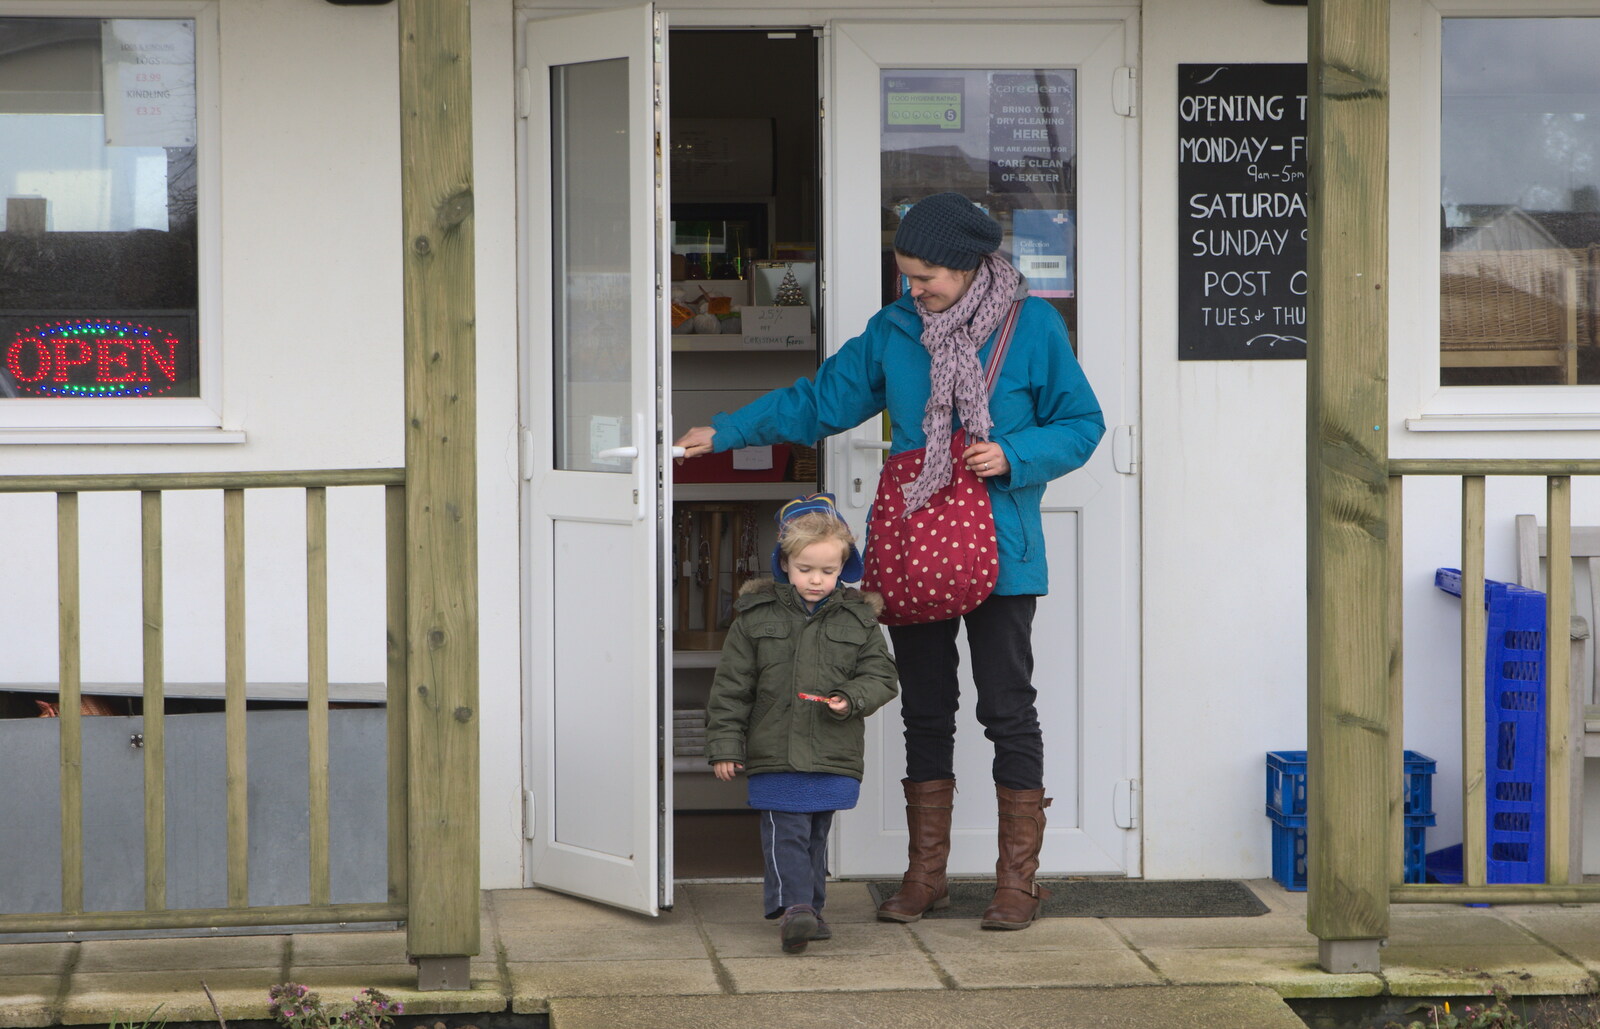 Harry and Isobel exit the shop from A Trip to Grandma J's, Spreyton, Devon - 18th February 2015